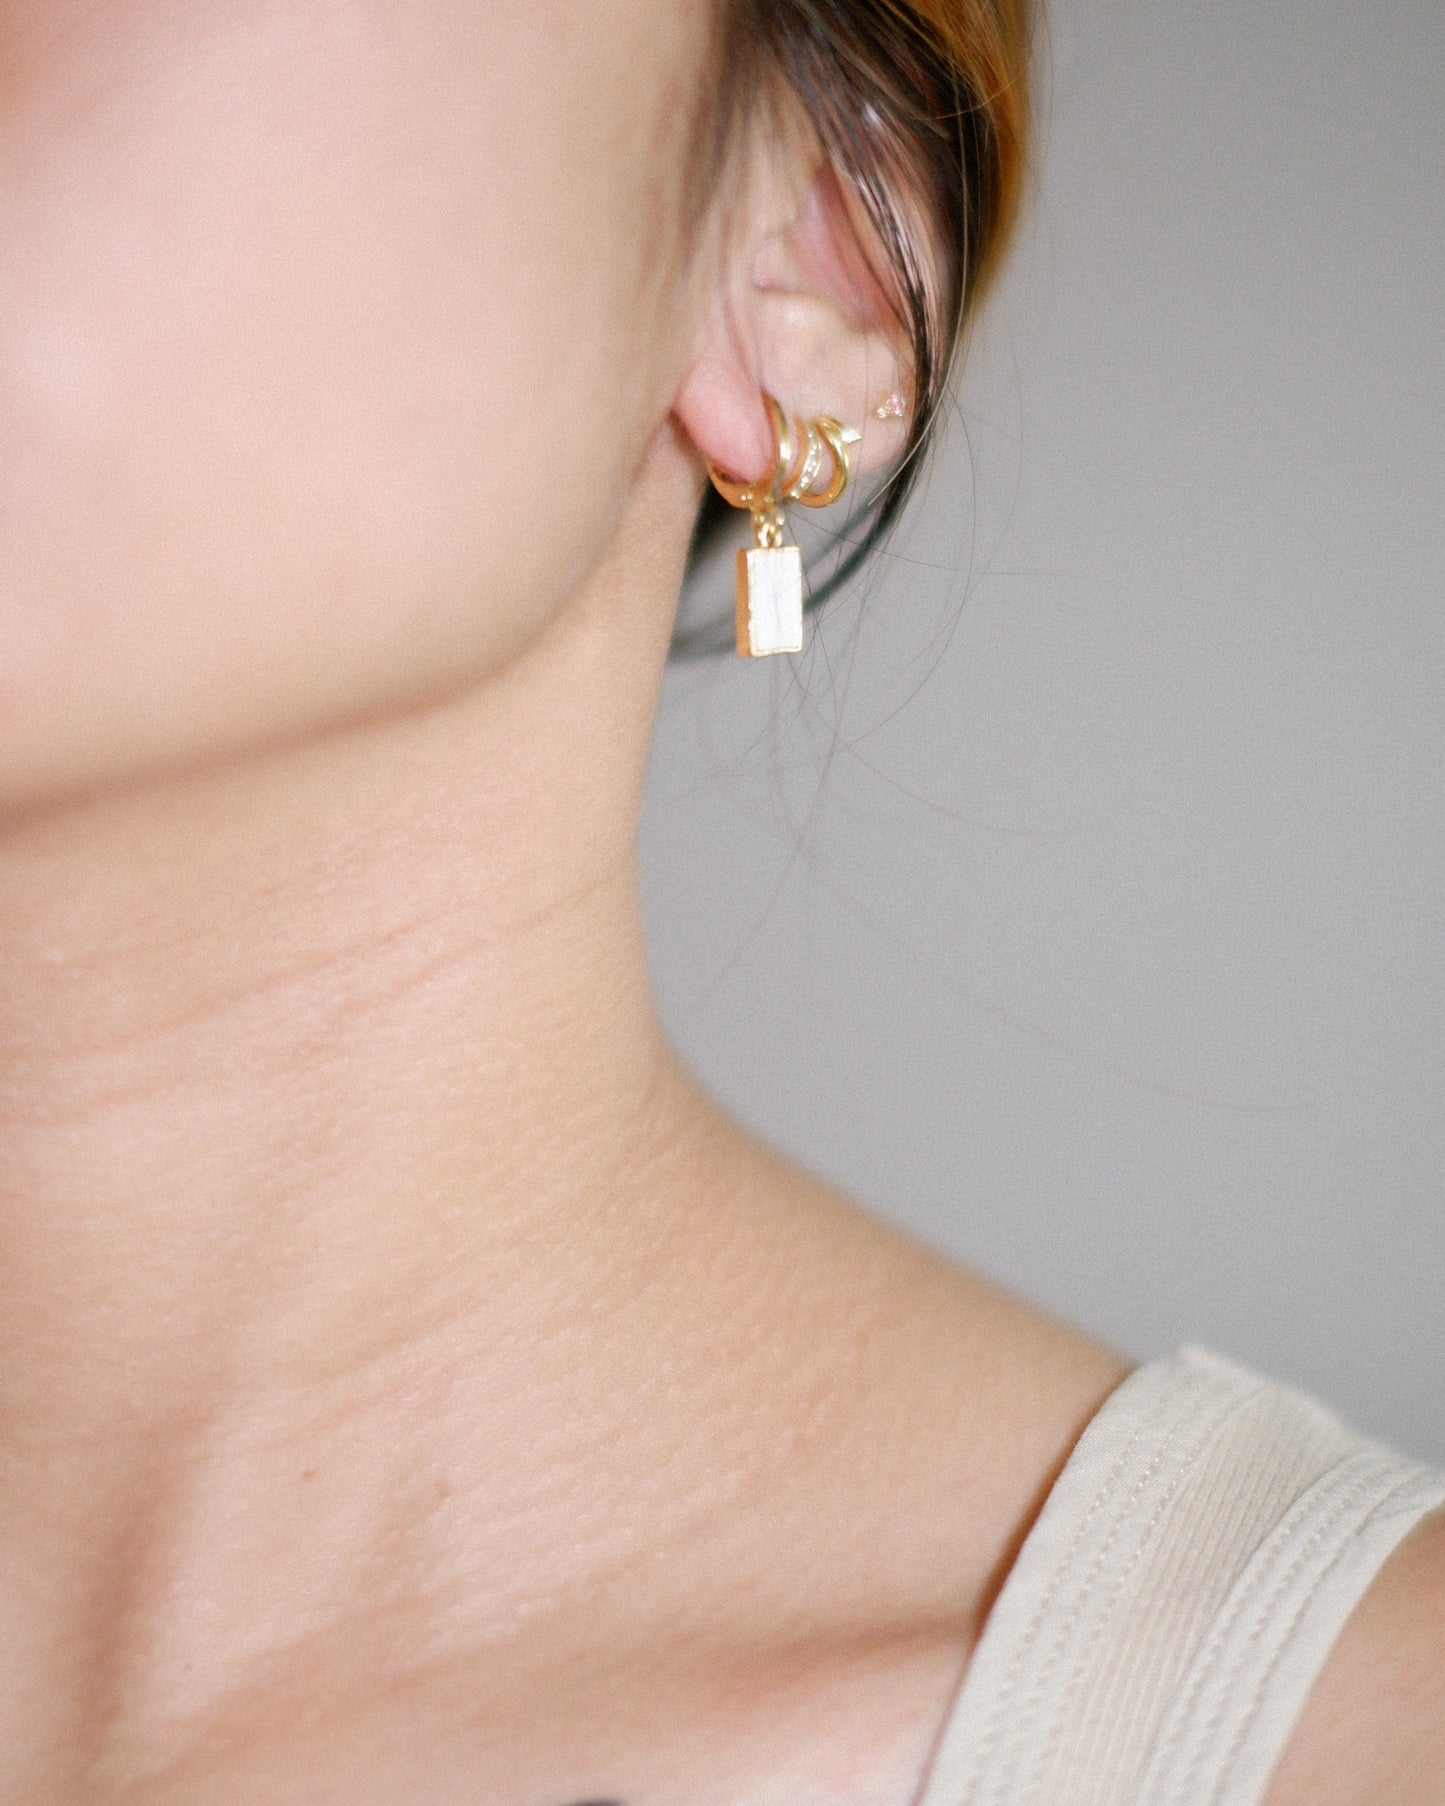 The Edgy Pearl Hoops